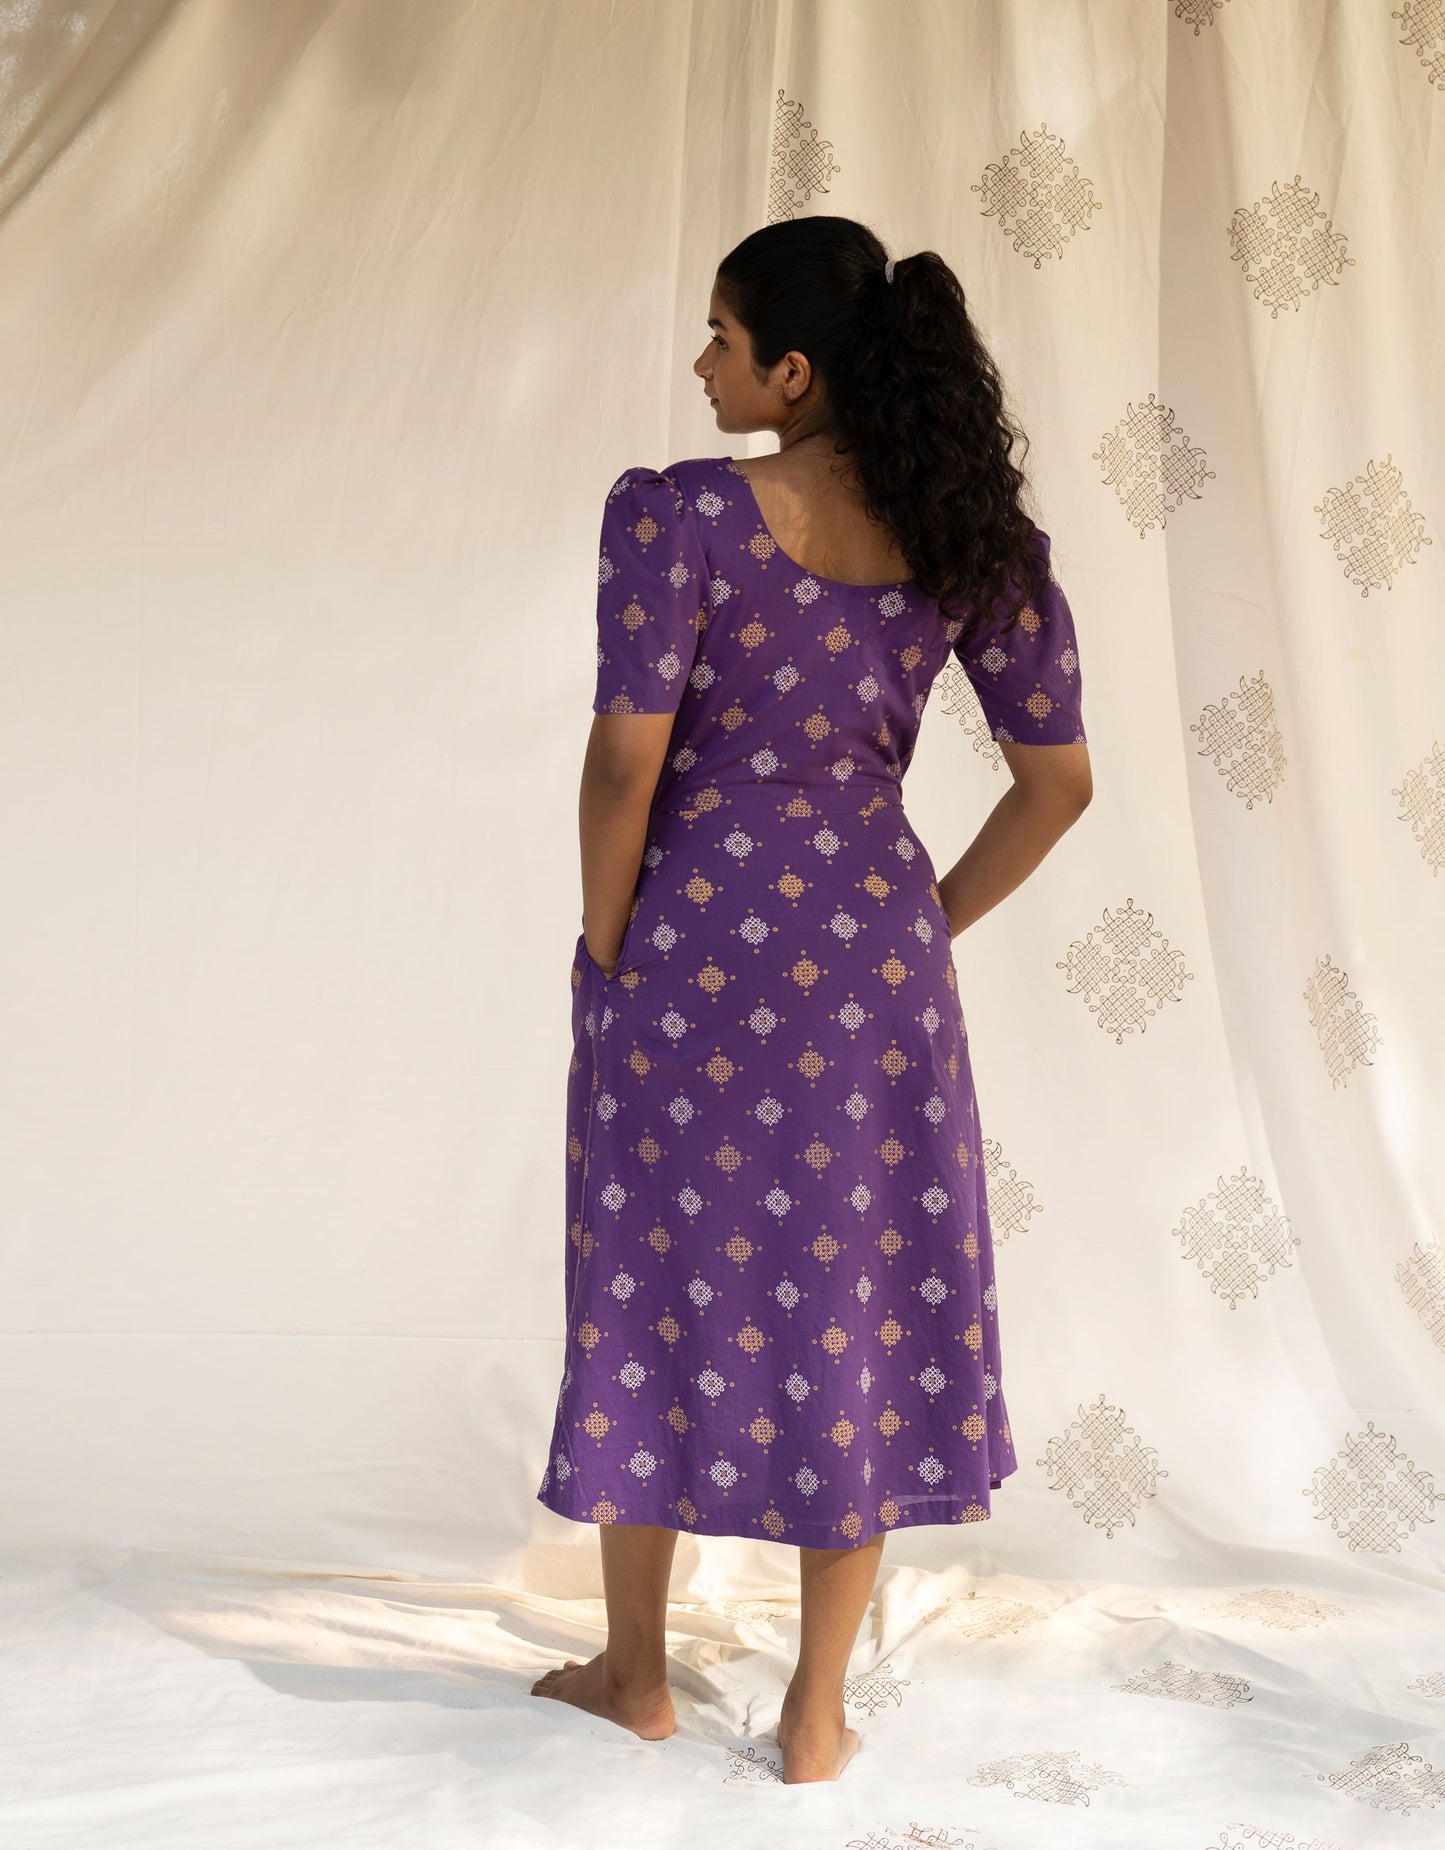 Hueloom Purple Reversible  Cut-out Dress back view without cut in the centre